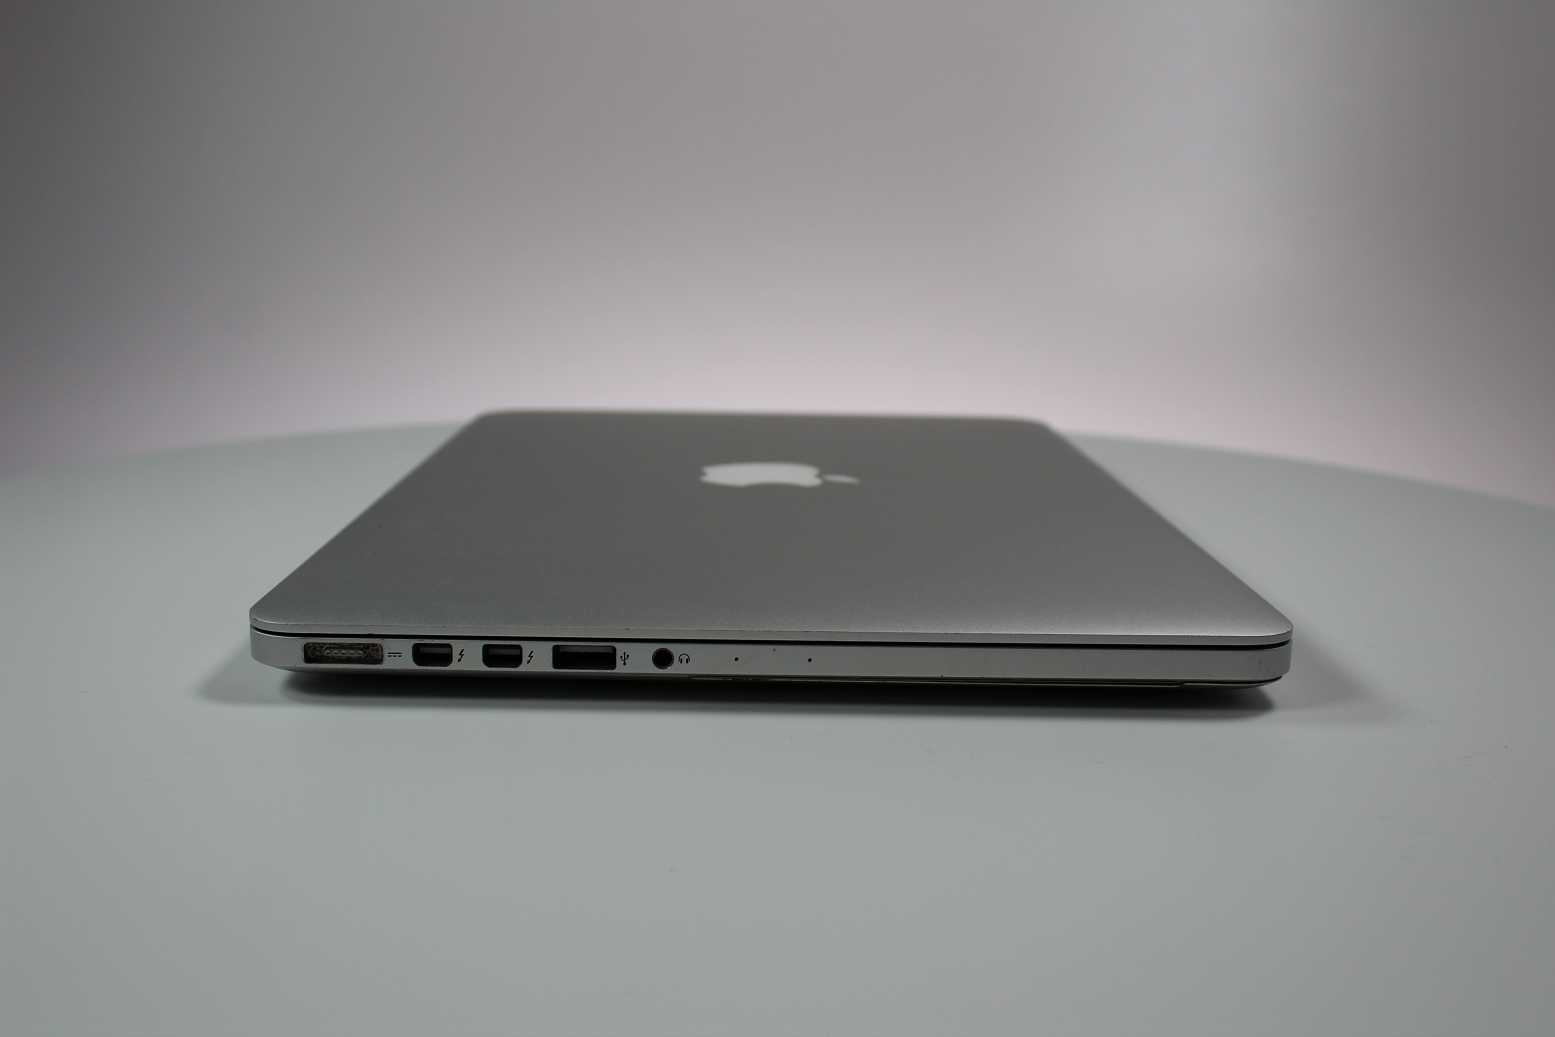 Apple MacBook Pro 13-inch 2013 2.6GHz Core i5 8GB RAM Integrated Graphics (Wear & Tear Special)